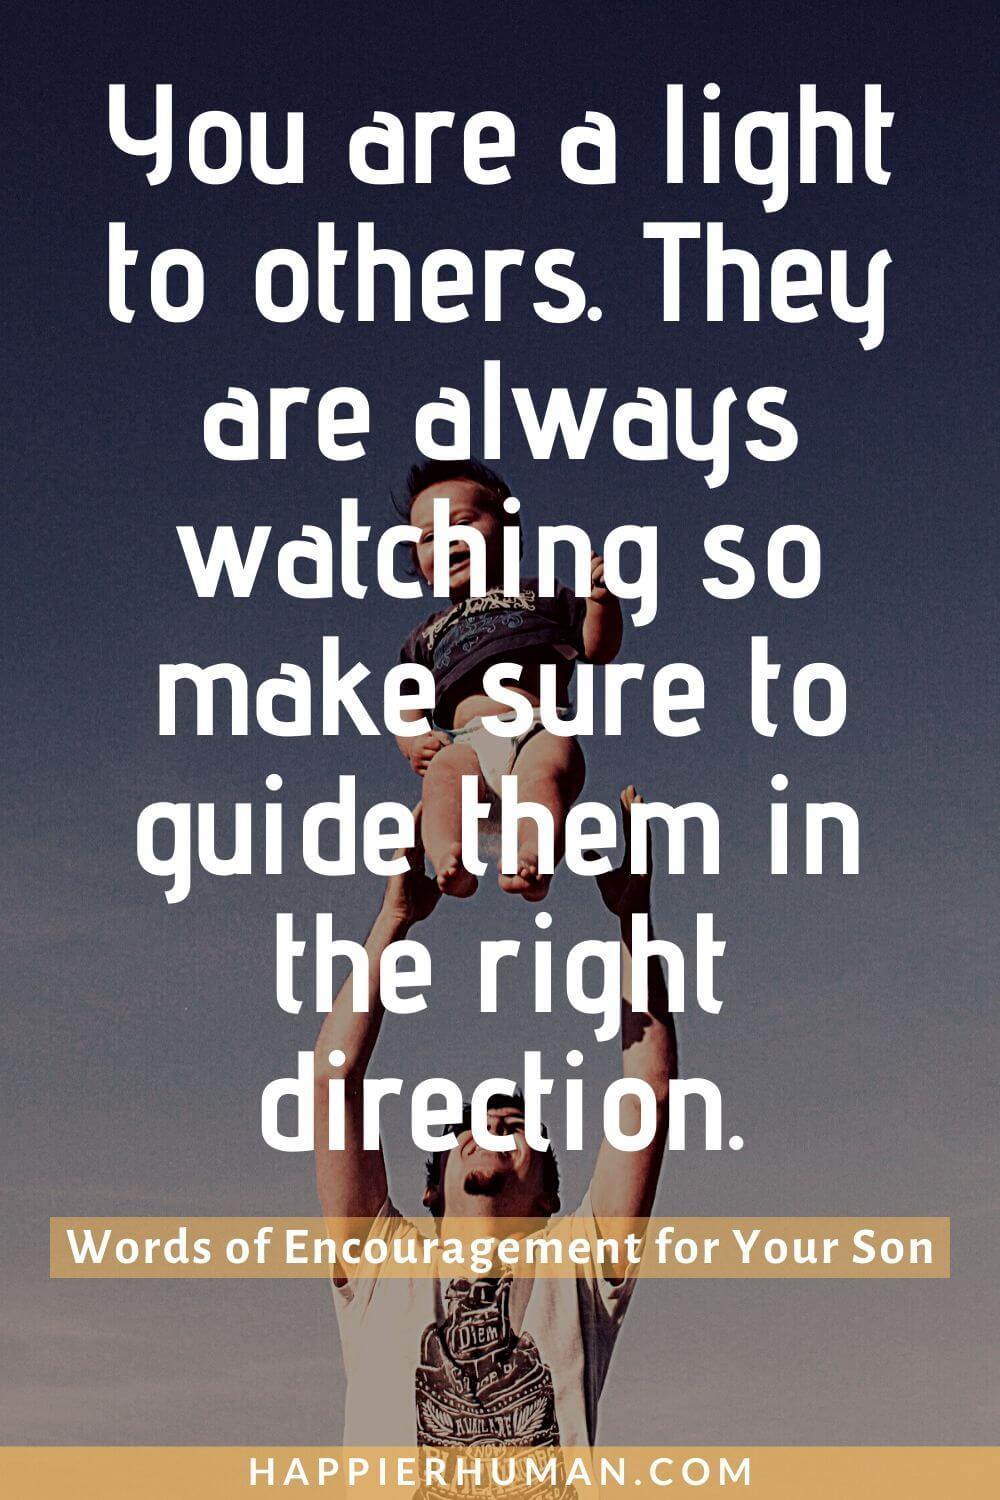 Words of Encouragement for a Son - You are a light to others. They are always watching so make sure to guide them in the right direction. | quotes about sons growing up | son quotes from dad | proud of my son message #encouragingwords #family #quotesaboutsons